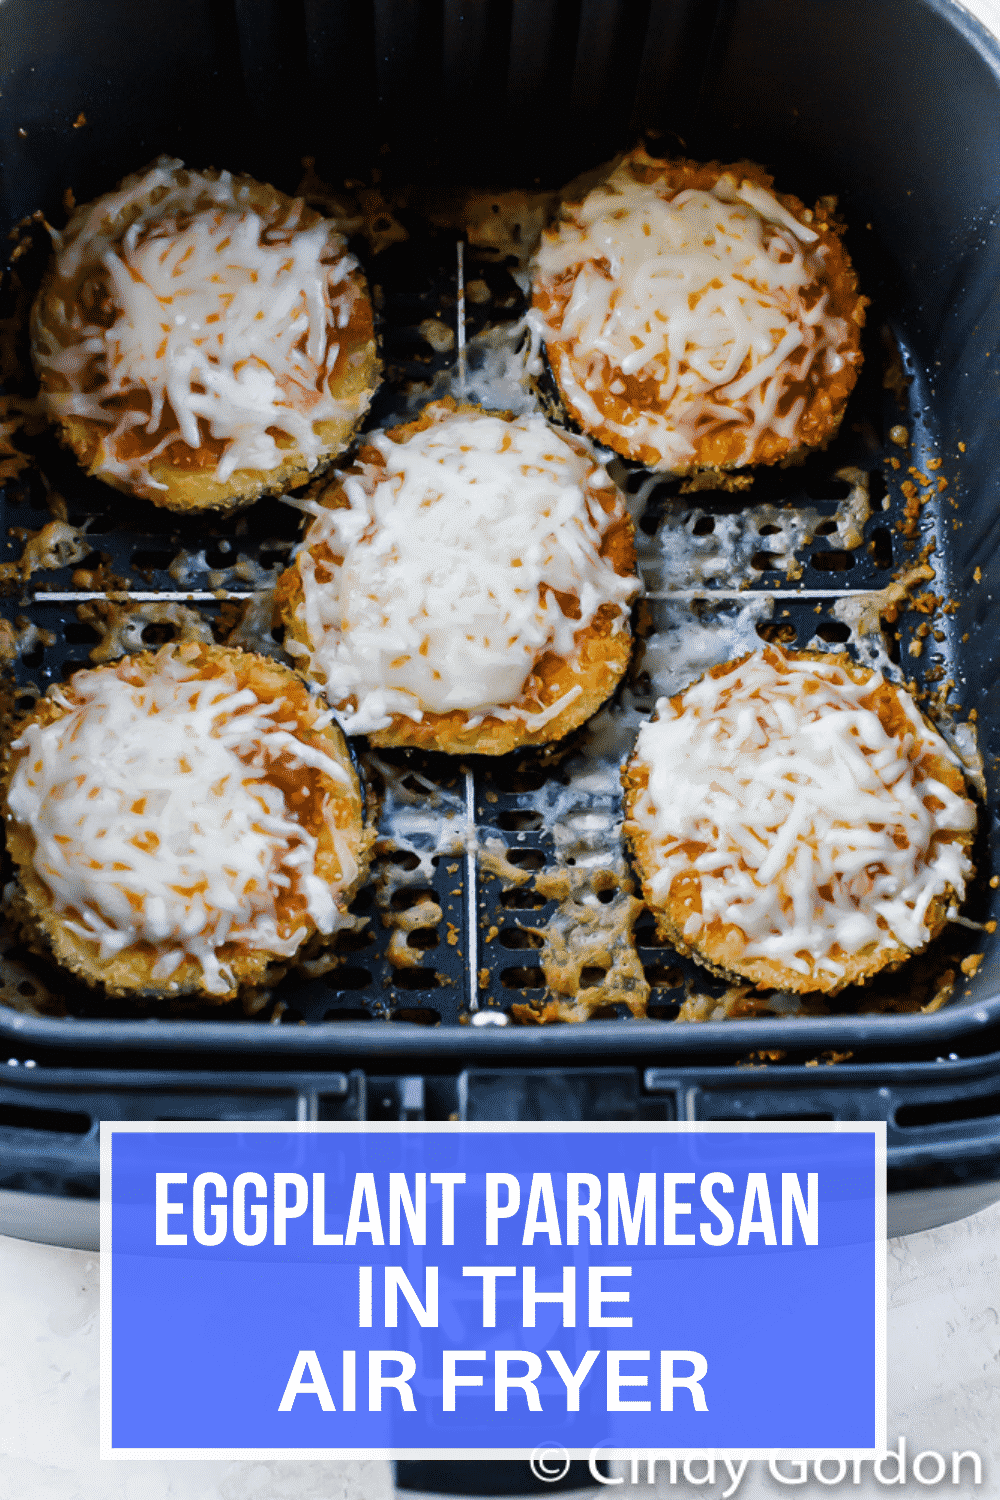 Airfryer eggplant parmesan is a classic vegetarian italian dinner that you can make with less oil and less mess by using your air fryer. Crispy on the outside and perfectly tender on the inside, you’ll love this recipe. #Airfyer #eggplant via @vegetarianmamma